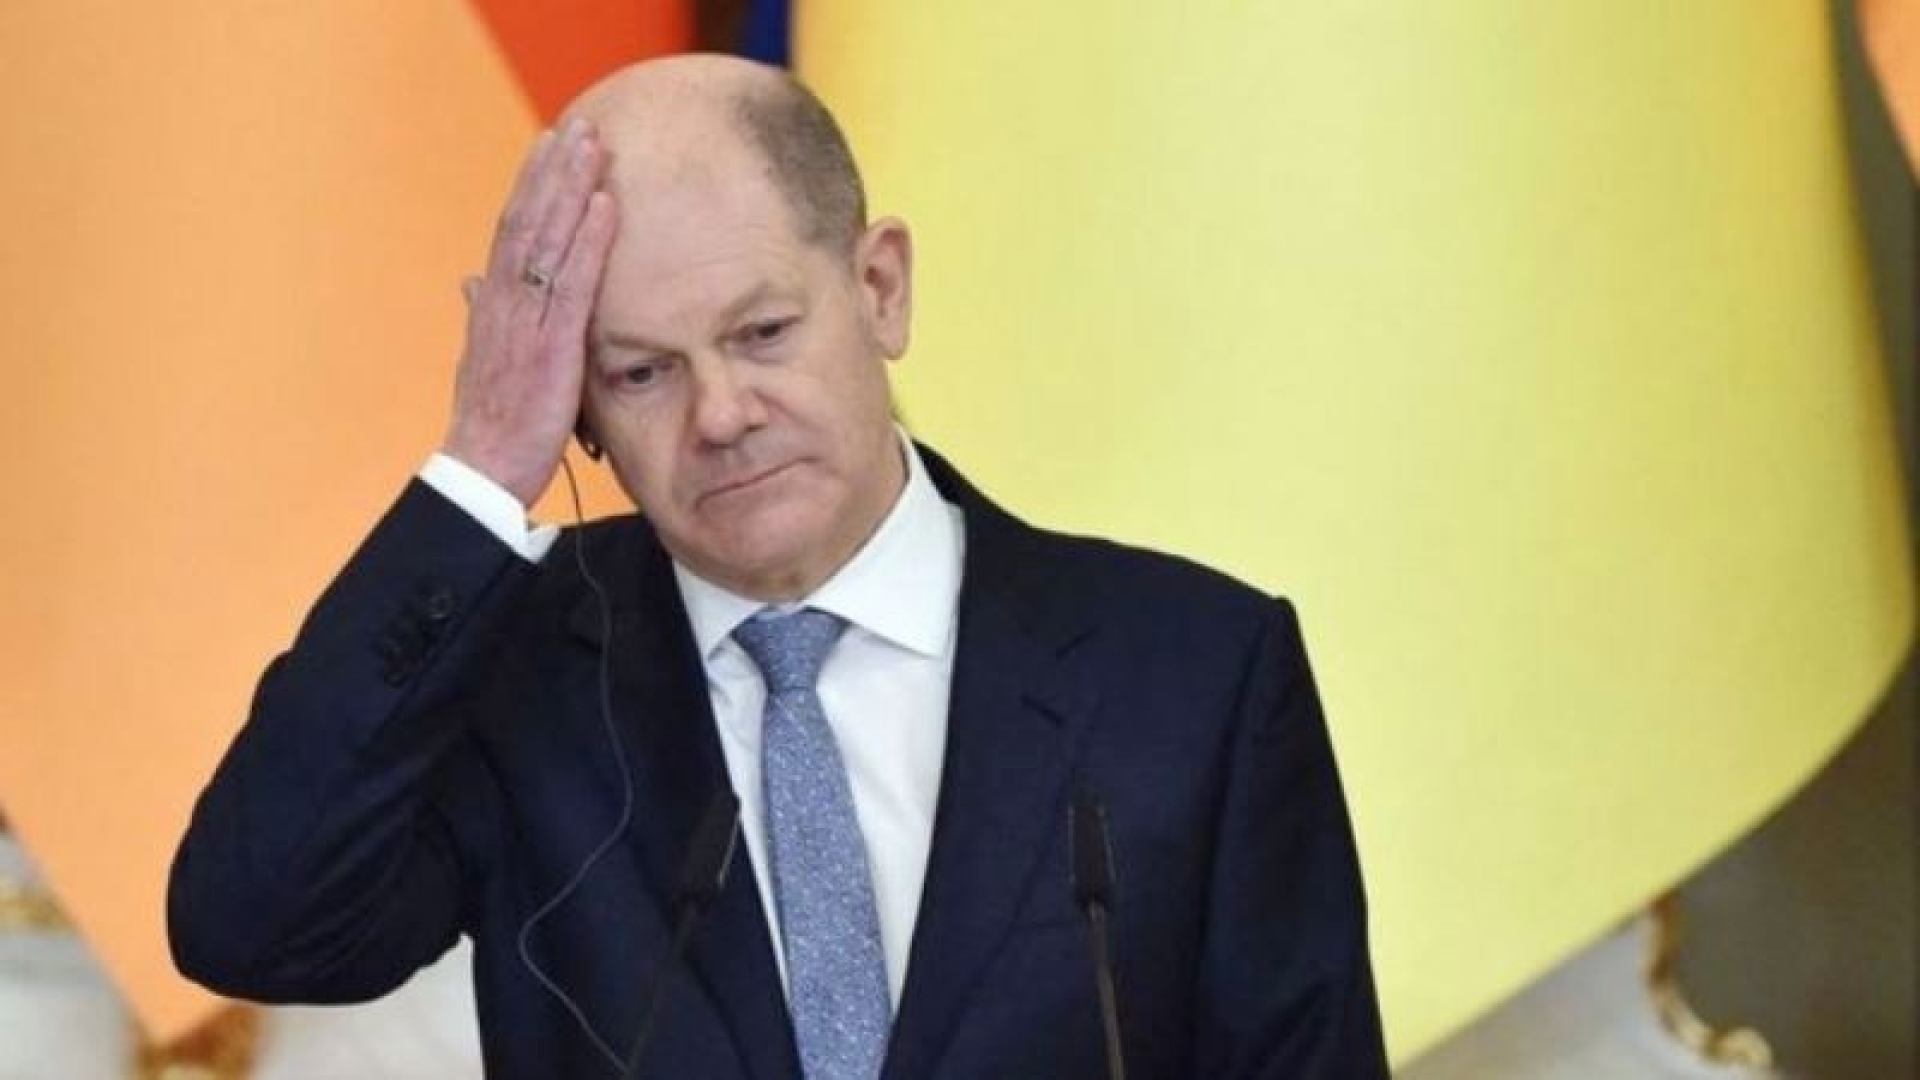 "Sanctions brake" wants peace: Olaf Scholz will give all the best to agree with Vladimir Putin?